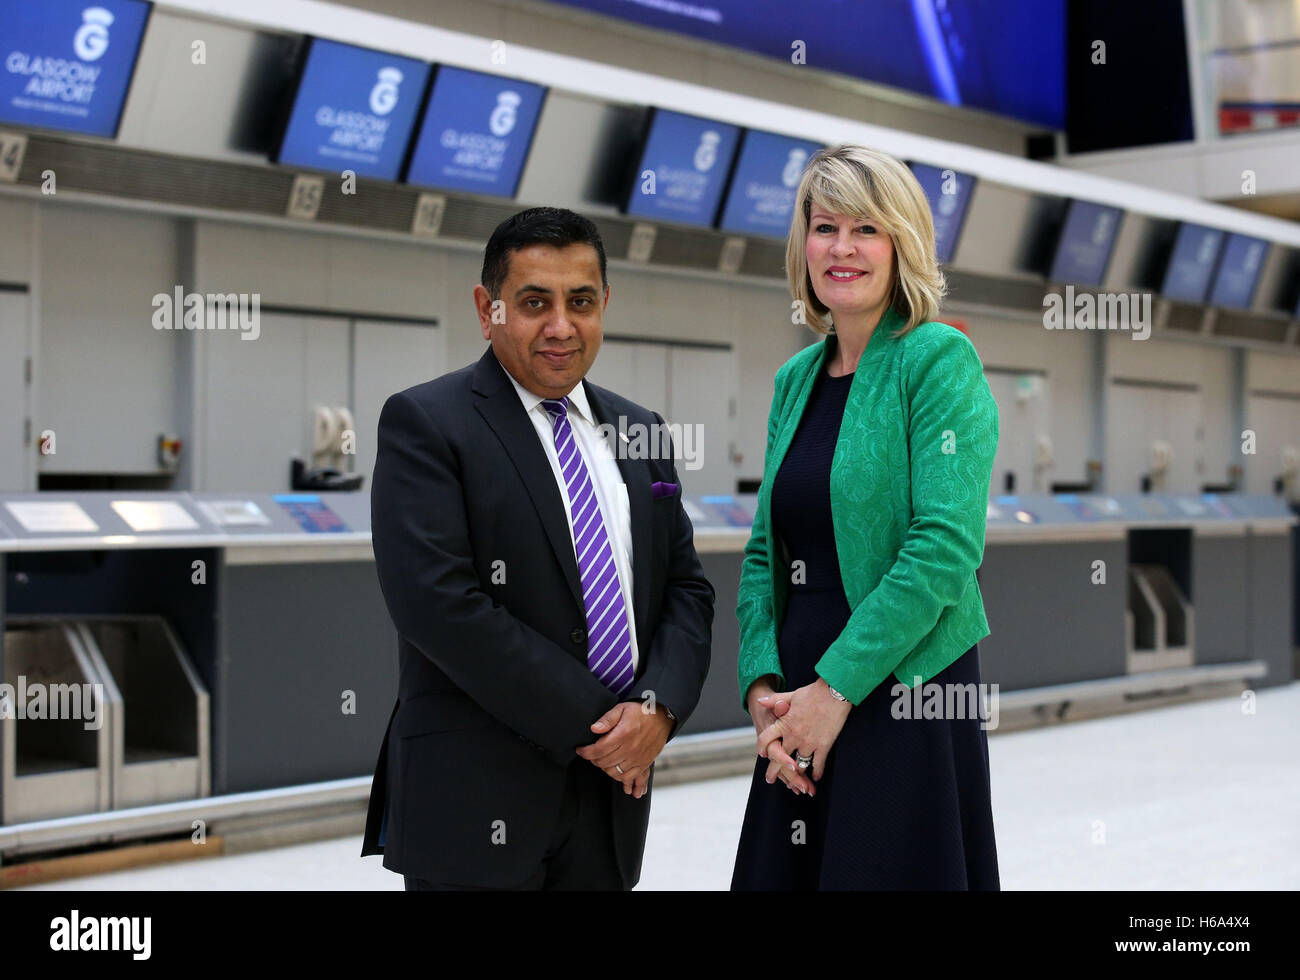 Aviation Minister Lord Ahmad during a visit to Glasgow Airport where he met the airport's Chief Executive Amanda McMillan (right) and outlined the advantages of the expansion announced yesterday of Heathrow airport with the planned construction of a third runway. Stock Photo